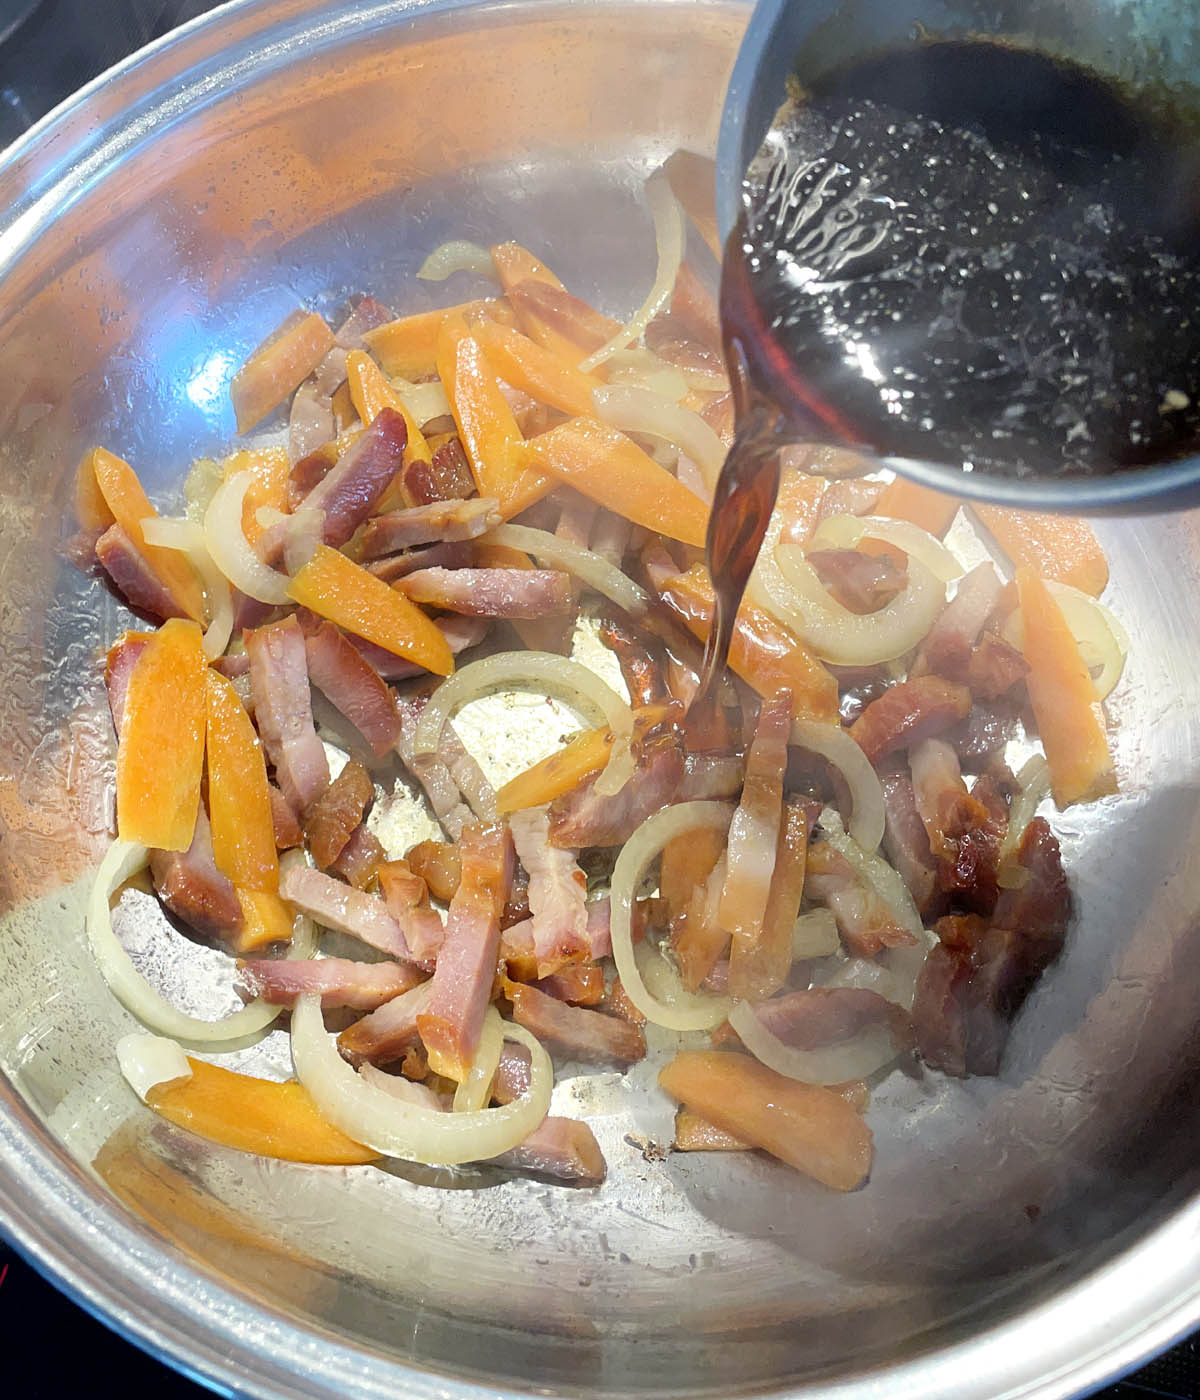 Brown liquid being poured into a wok containing sliced onions and carrots and chunks of meat.